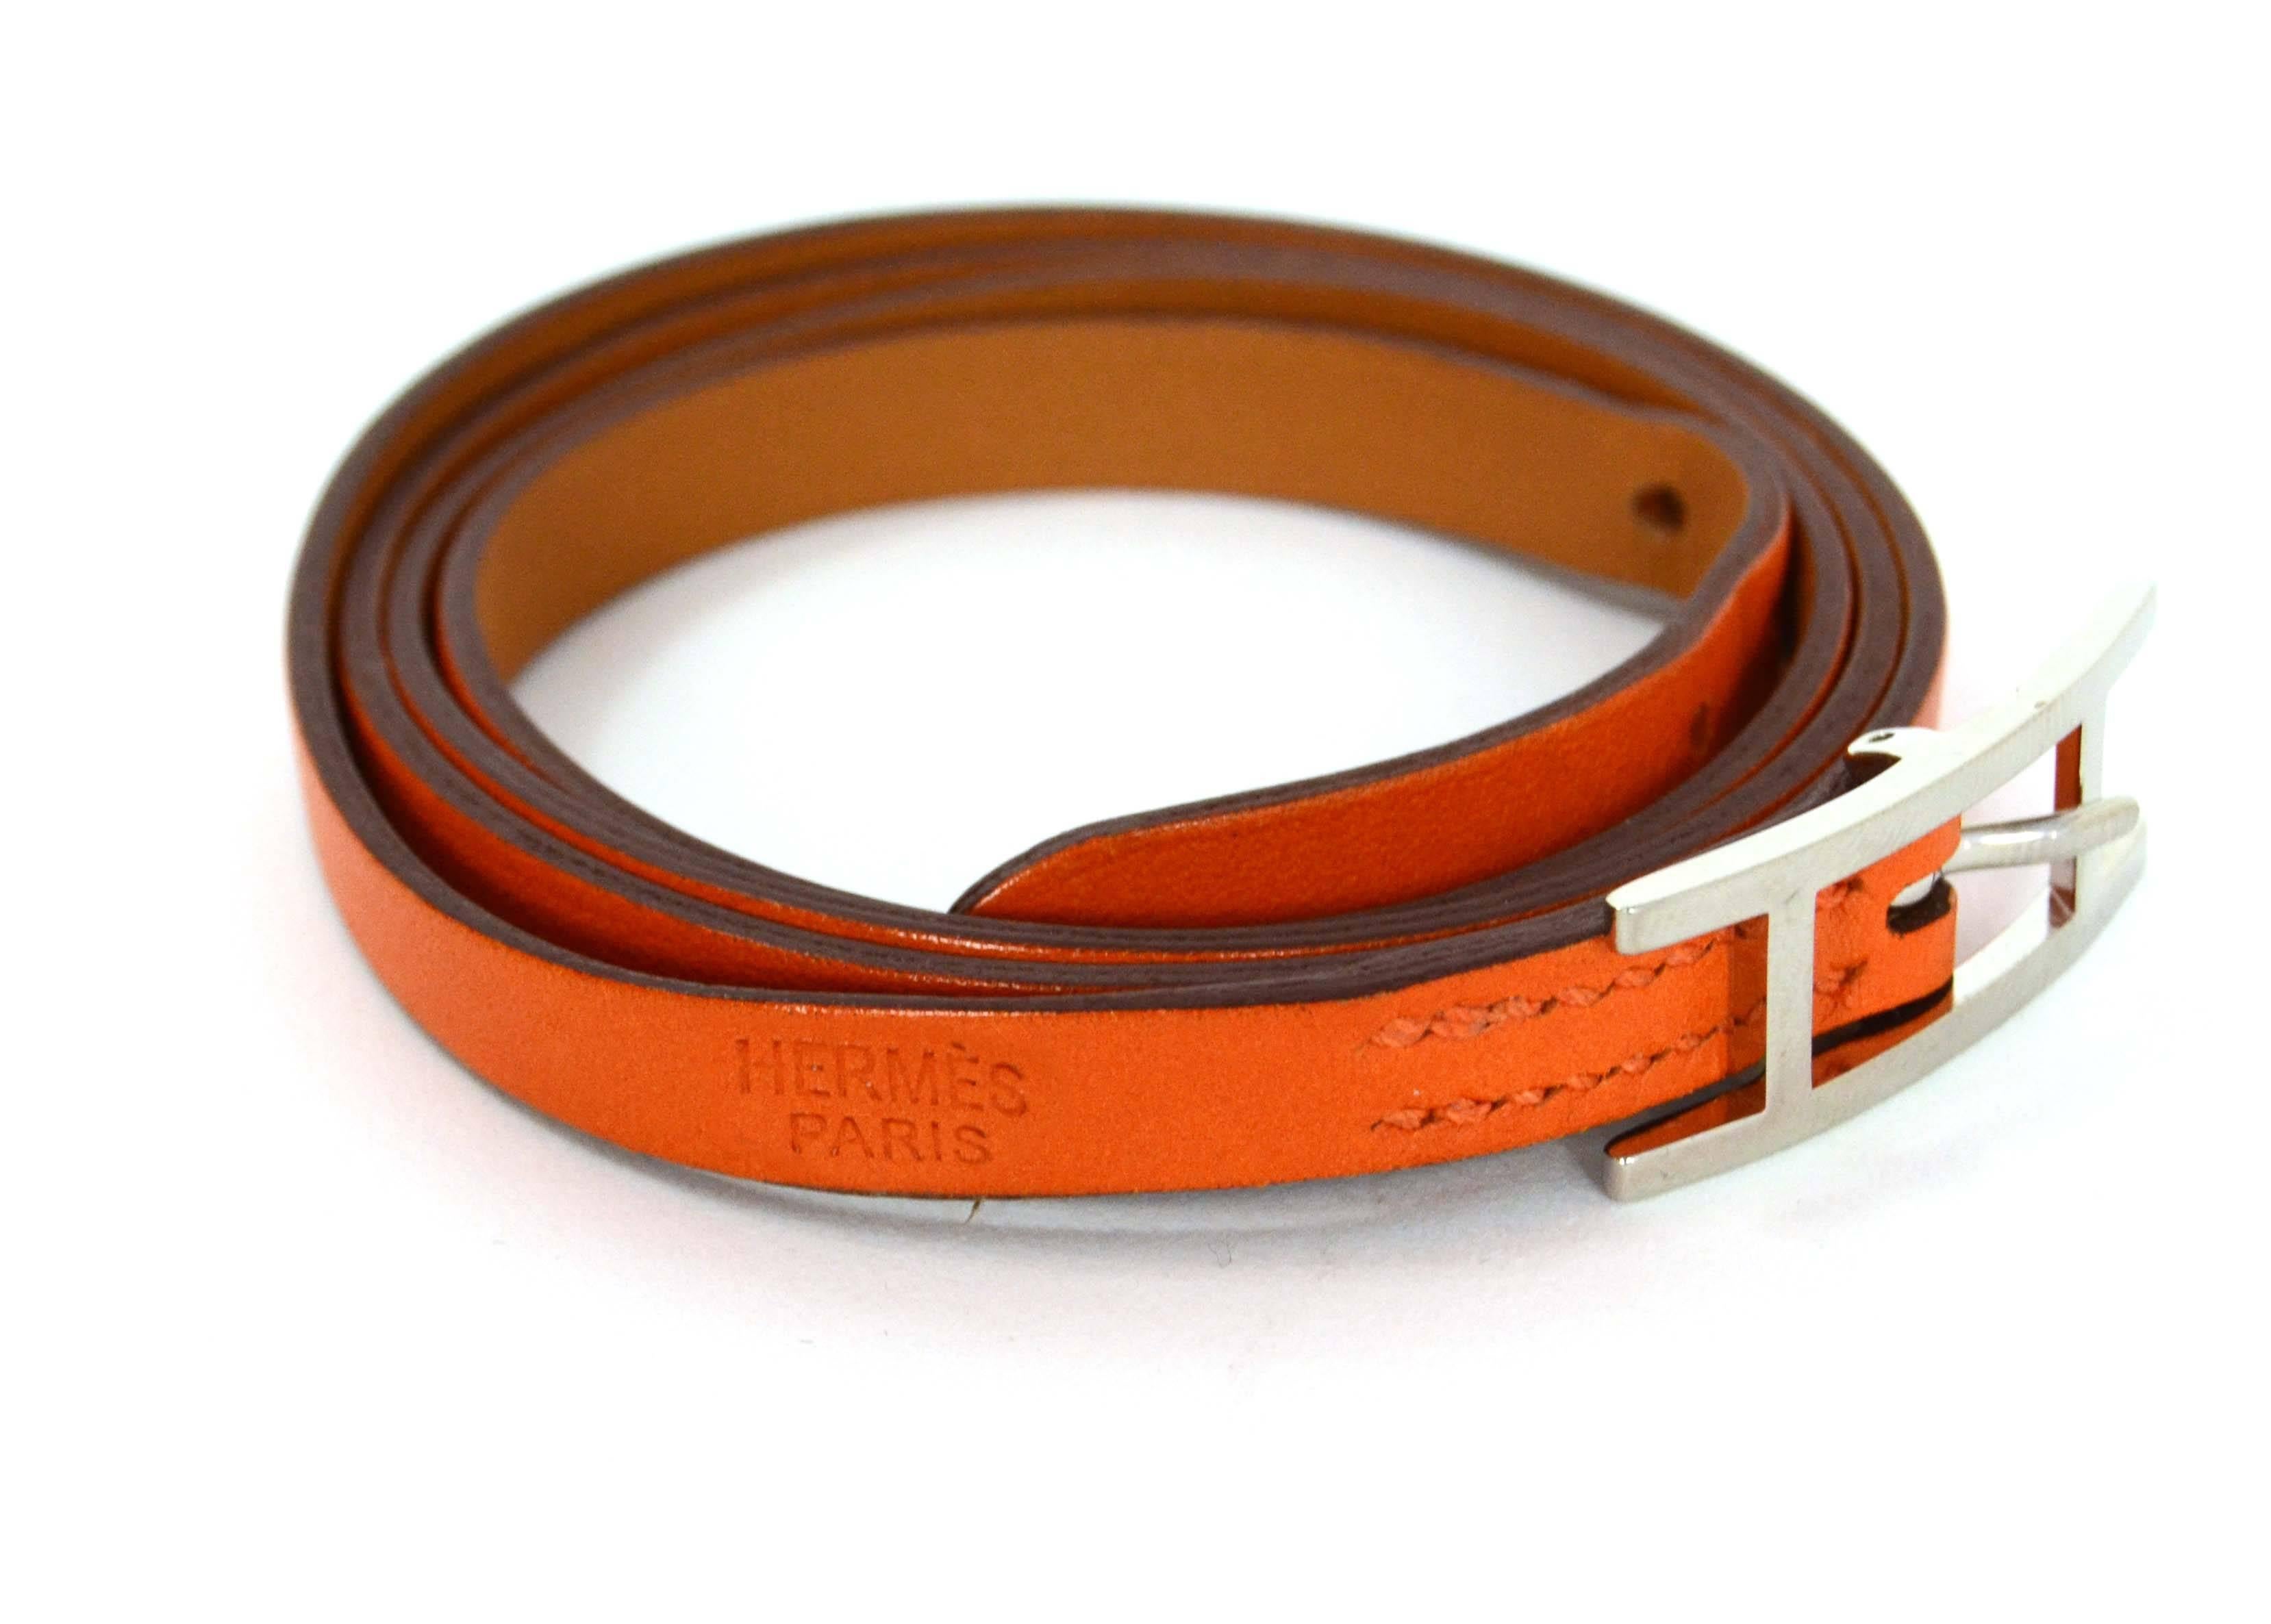 Hermes Orange Swift Leather Hapi Wrap Around Bracelet

    Made In: France

    Year of Production: 2014

    Color: Orange

    Hardware: Palladium

    Materials: Swift leather, metal

    Closure/Opening: Pull through buckle clasp

